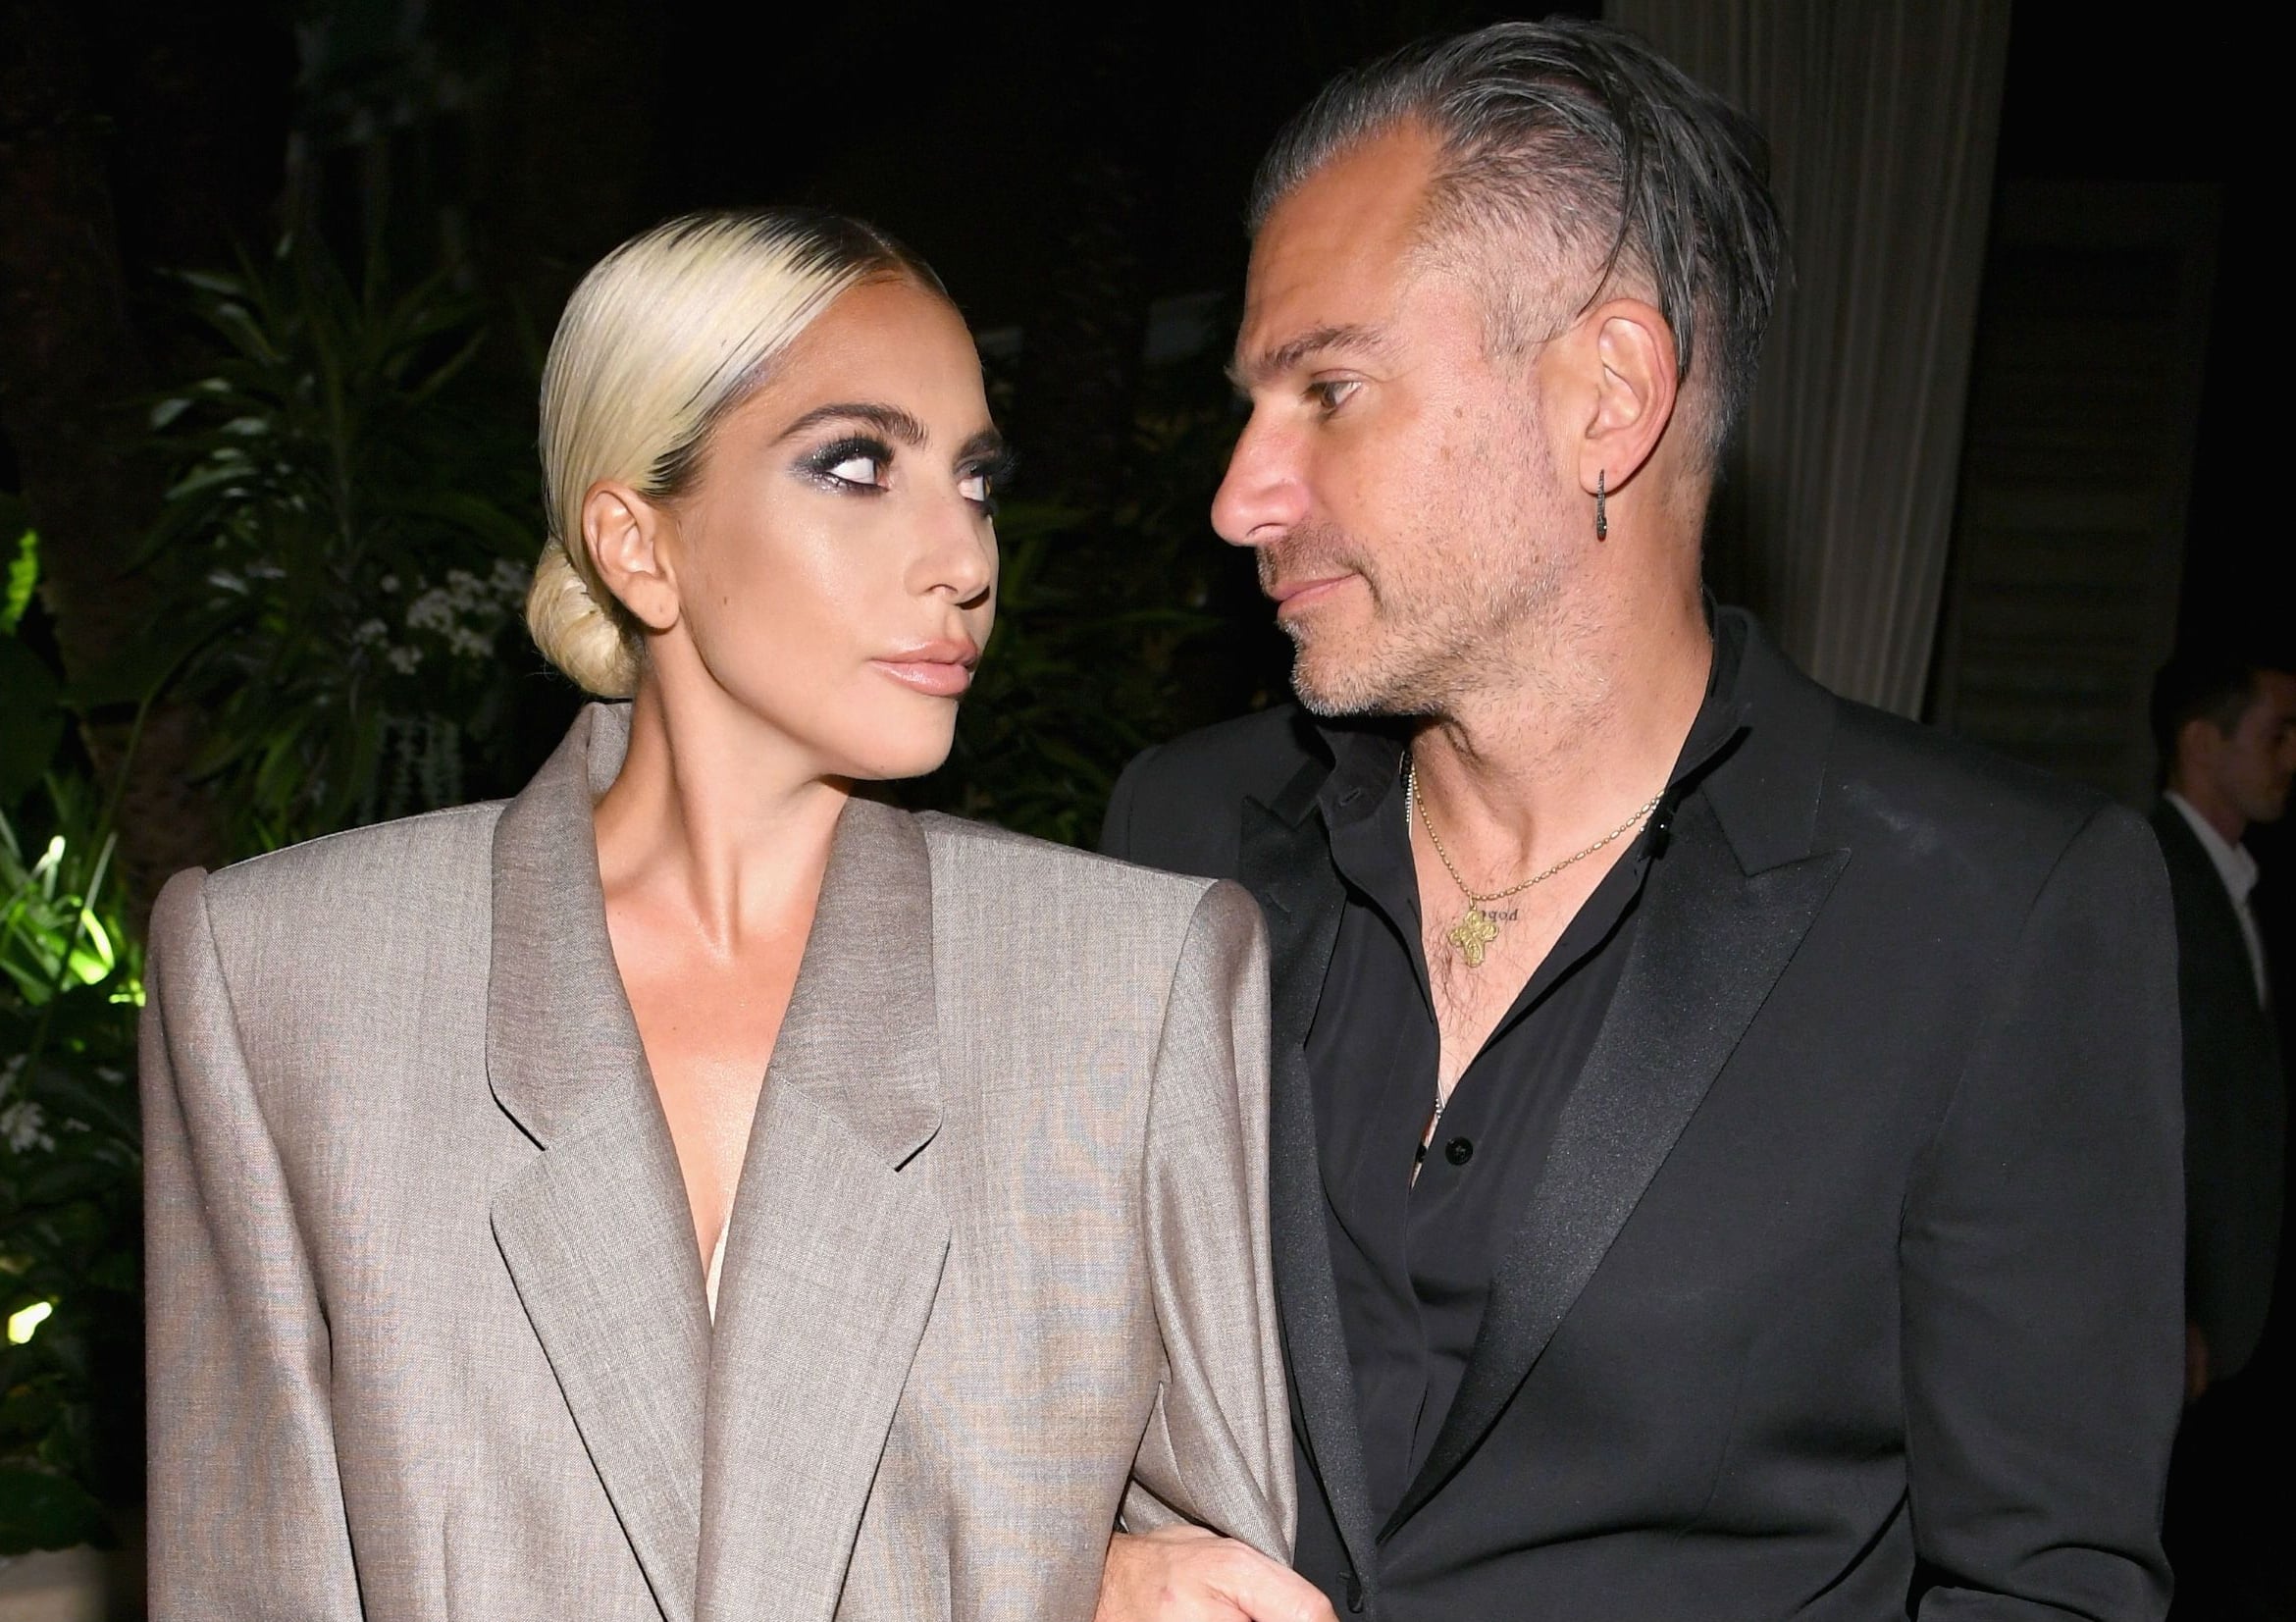 VIDEO: Who is Lady Gaga's Finacée CHRISTIAN CARINO?? Here's Everything You NEED TO KNOW